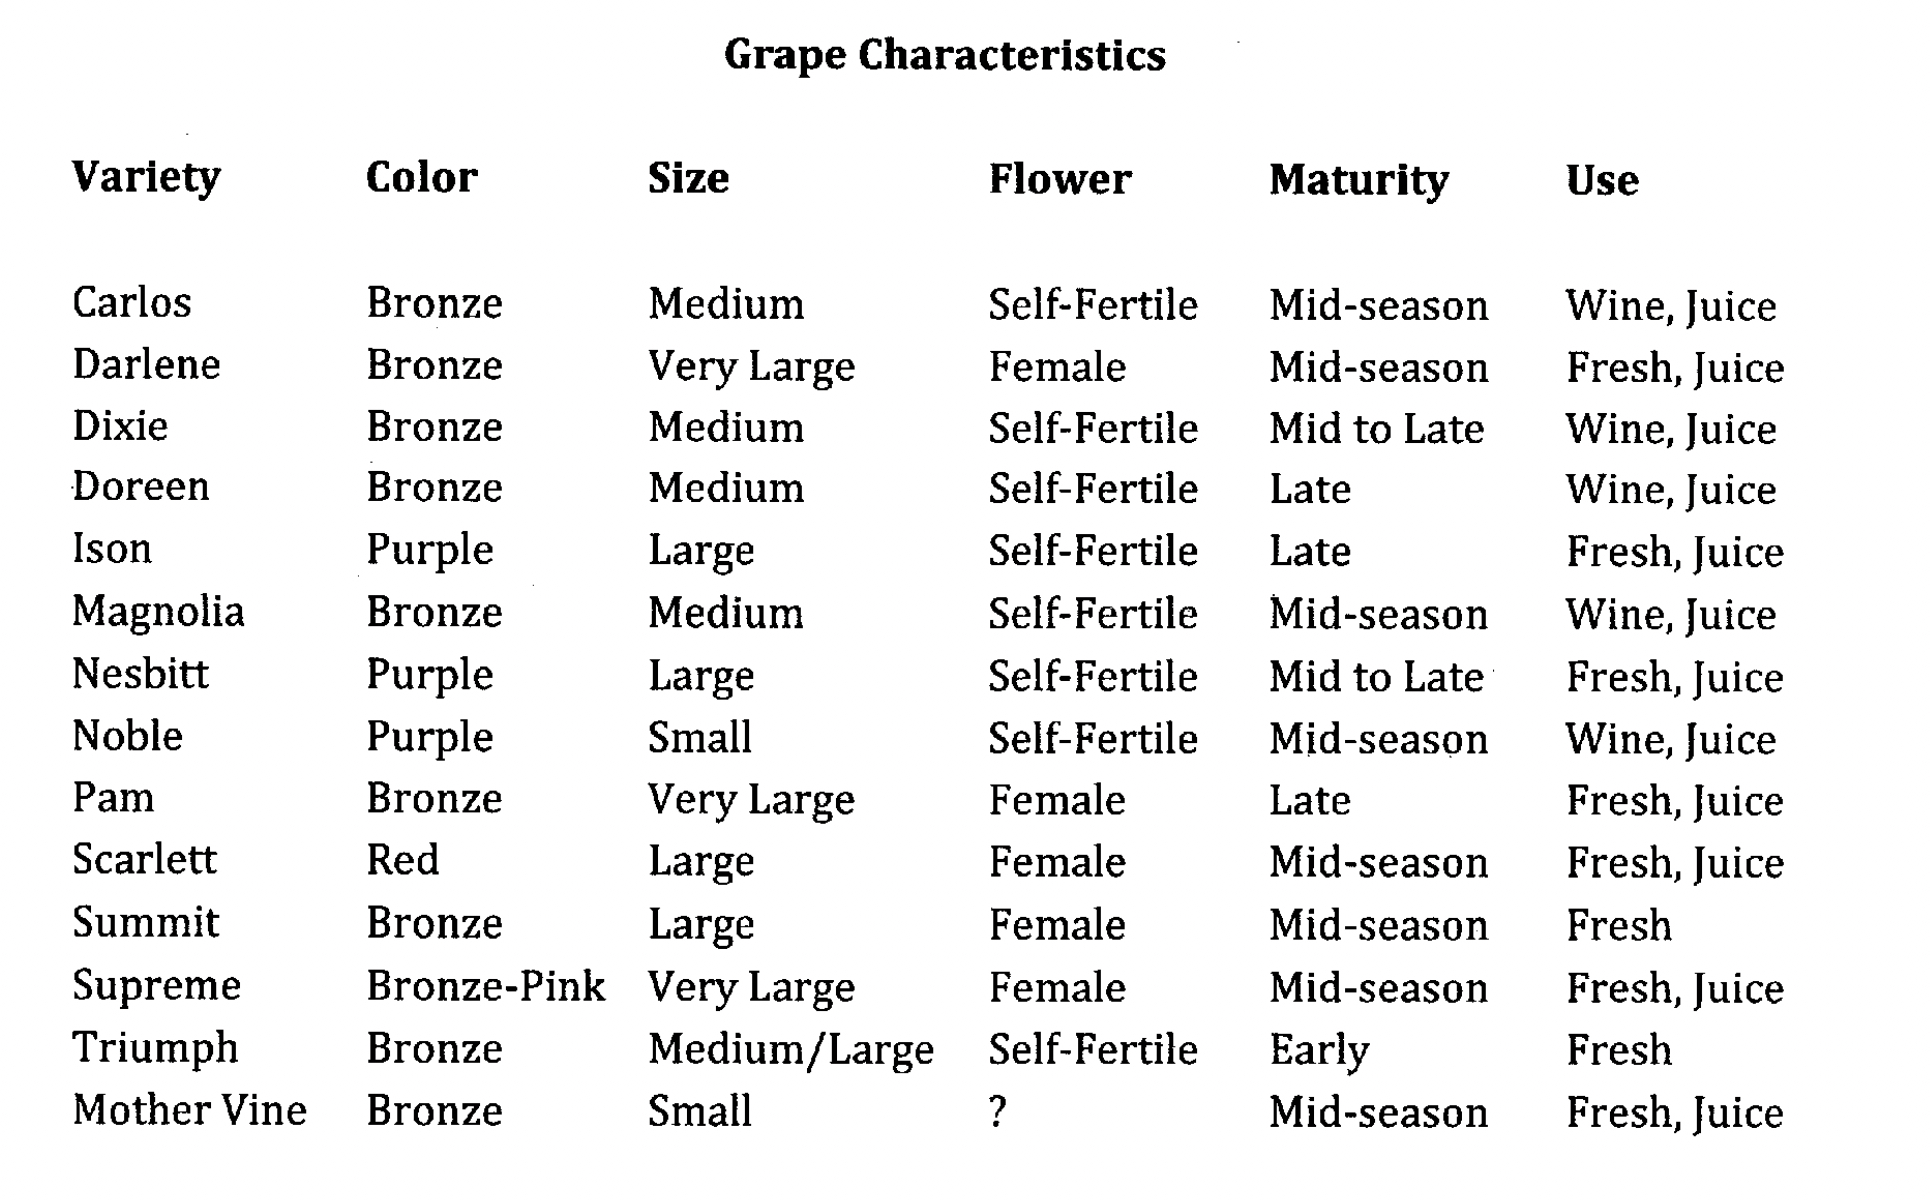 A chart of grape characteristics and their characteristics.